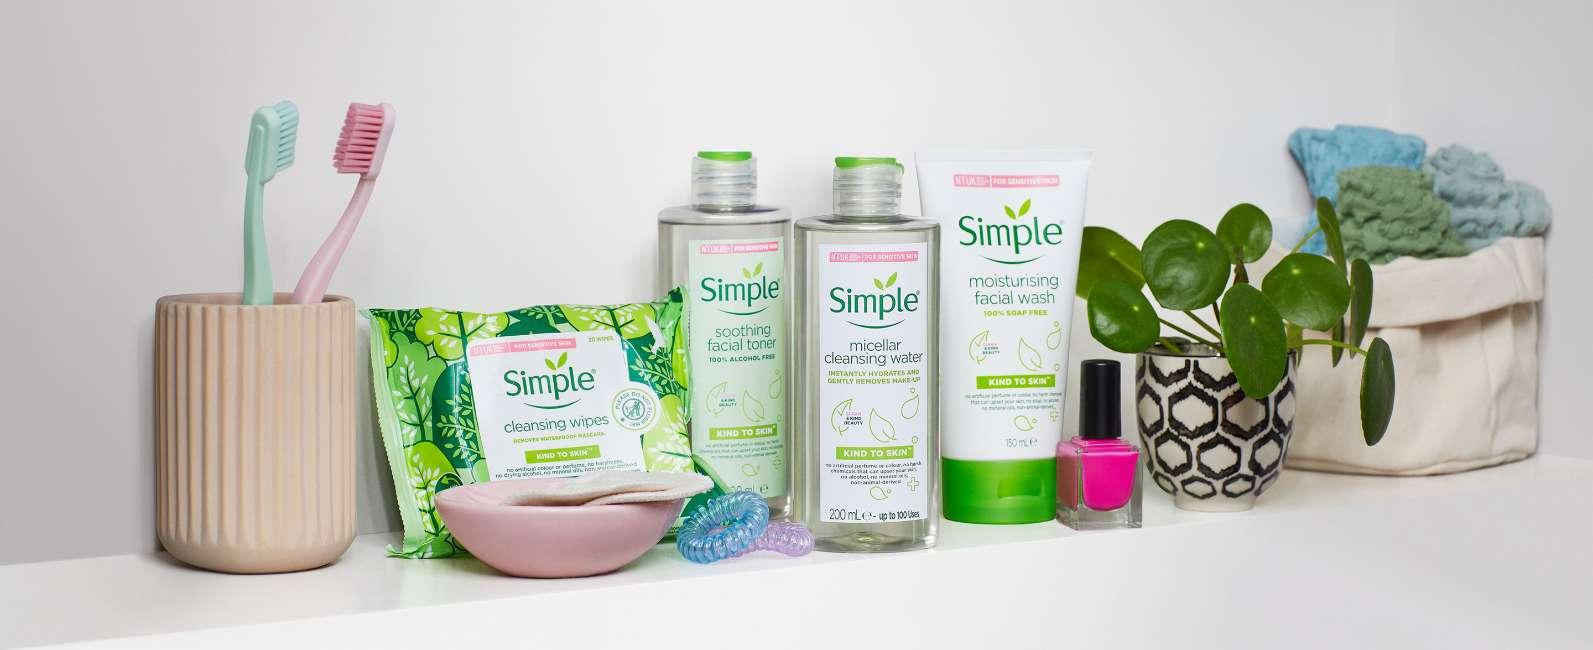 Your Daily Skincare Routine| Simple® Skincare